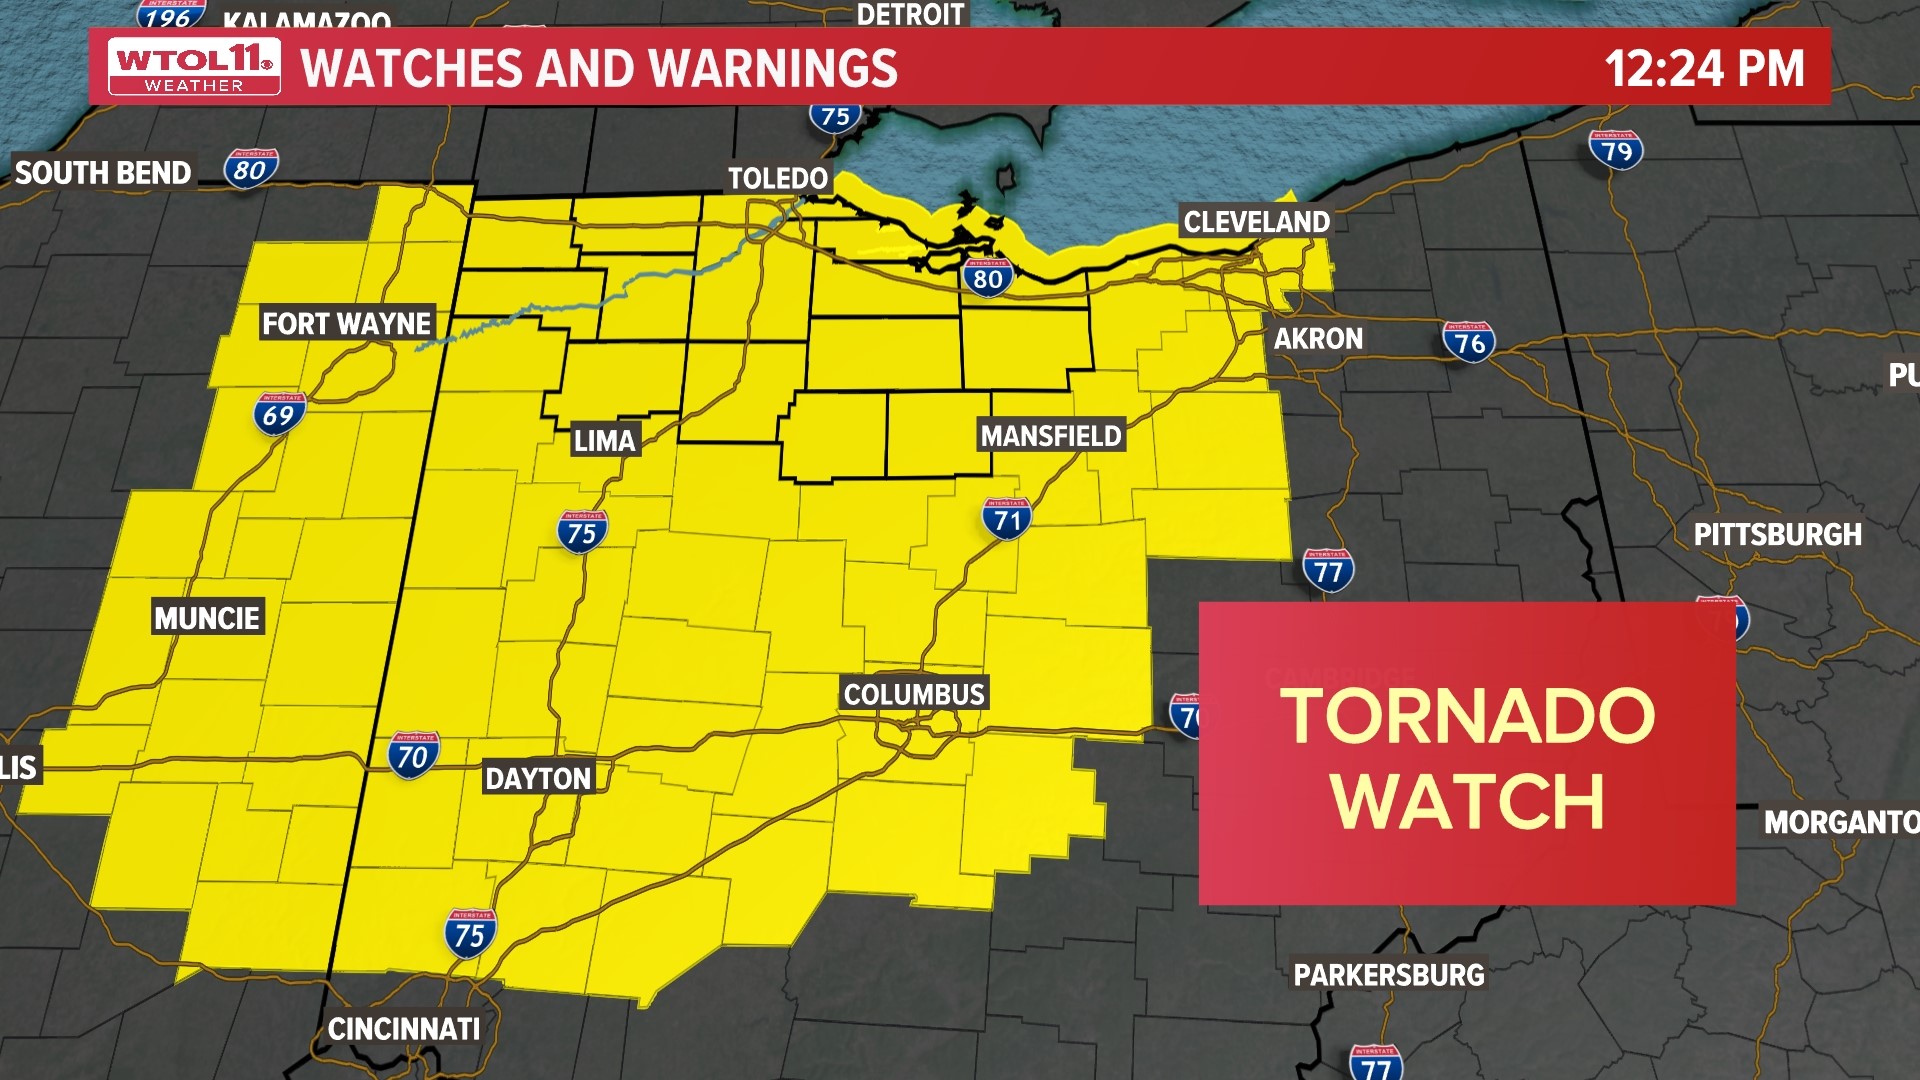 The WTOL 11 Weather Team has the latest info on Wednesday's severe weather threat